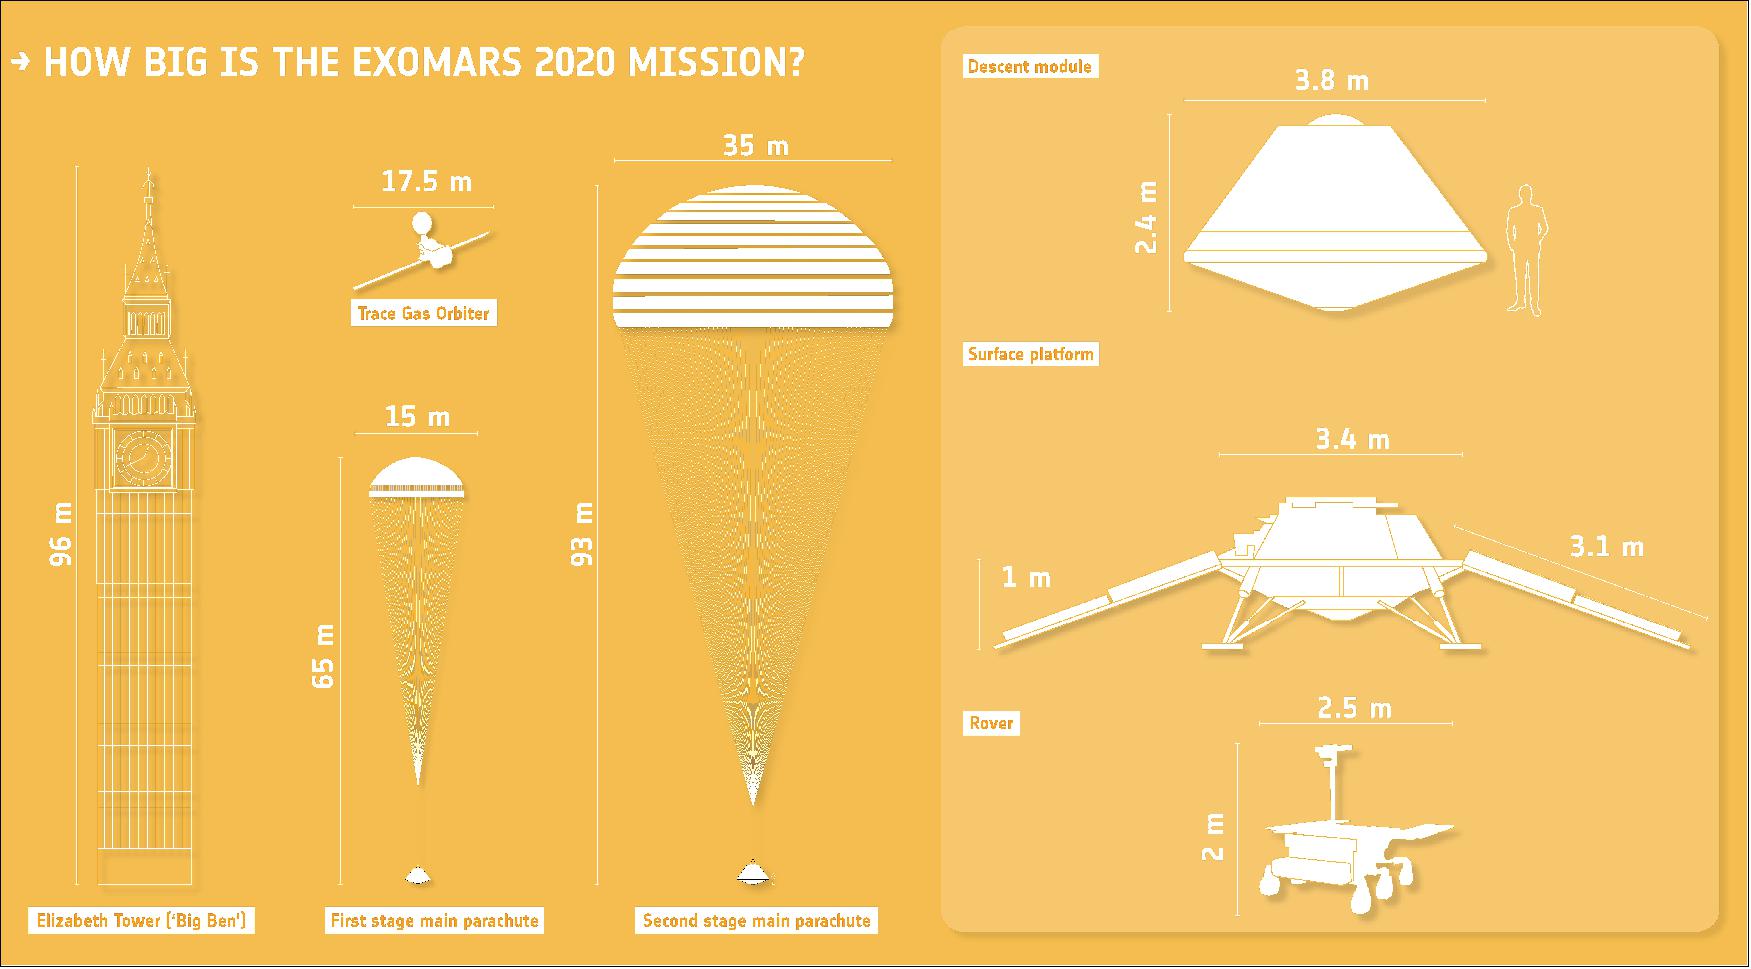 Figure 60: Sizes of key components of the ExoMars 2020 mission. The parachutes that will help slow the descent module through the martian atmosphere are compared in size to the iconic landmark of Elizabeth Tower ('Big Ben'), in London, UK. The descent module, which will deliver the surface platform and rover to the martian surface, is compared with the height of a human. The rover is stowed inside the surface platform, and will drive off one of the two ramps that will be deployed after landing (image credit: ESA)